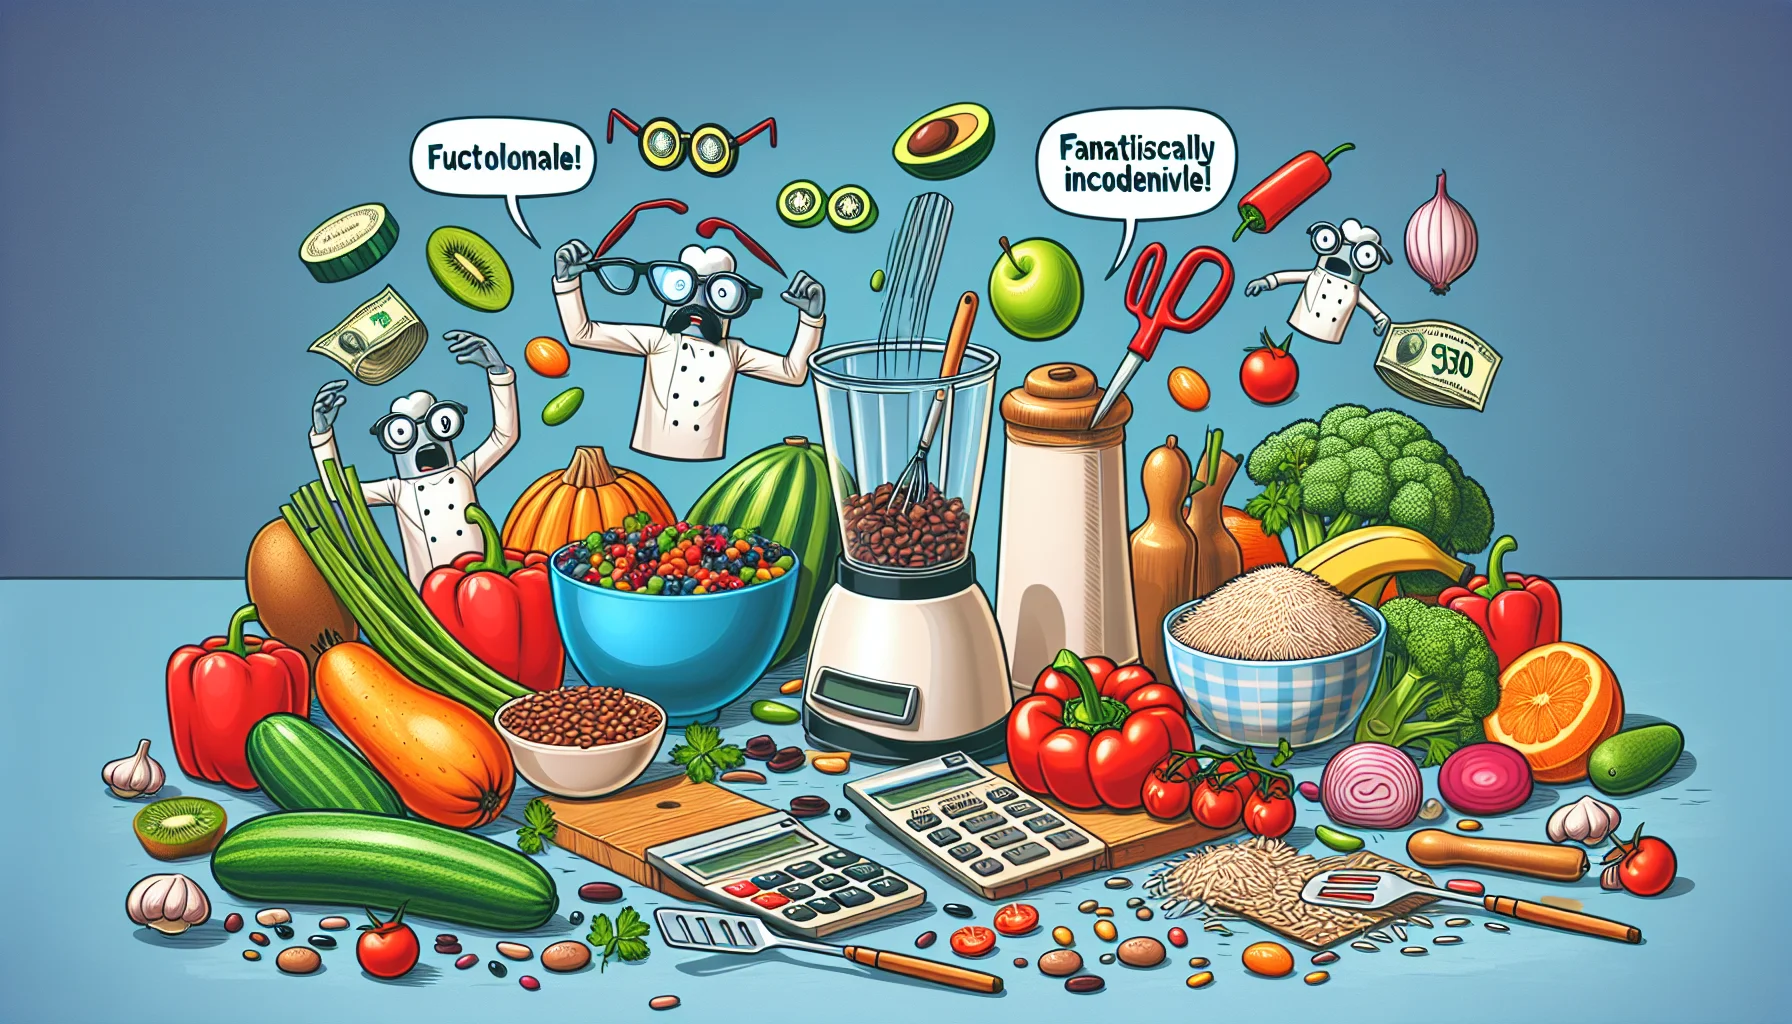 Create an amusing image showcasing a food preparation scenario for Food Allergy Awareness Week. The image should include an array of colorful allergen-free ingredients like fresh vegetables, fruits, beans, rice, and lean proteins, arranged in a manner that suggests they are fantastically inexpensive. There could also be a cartoon overlay of various kitchen utensils engaged in lively, humorous activities such as the blender trying to put on a pair of glasses, or a spatula using a calculator. This setting should motivate people to embrace healthy and economic food choices while embracing allergy-safe dietary habits.